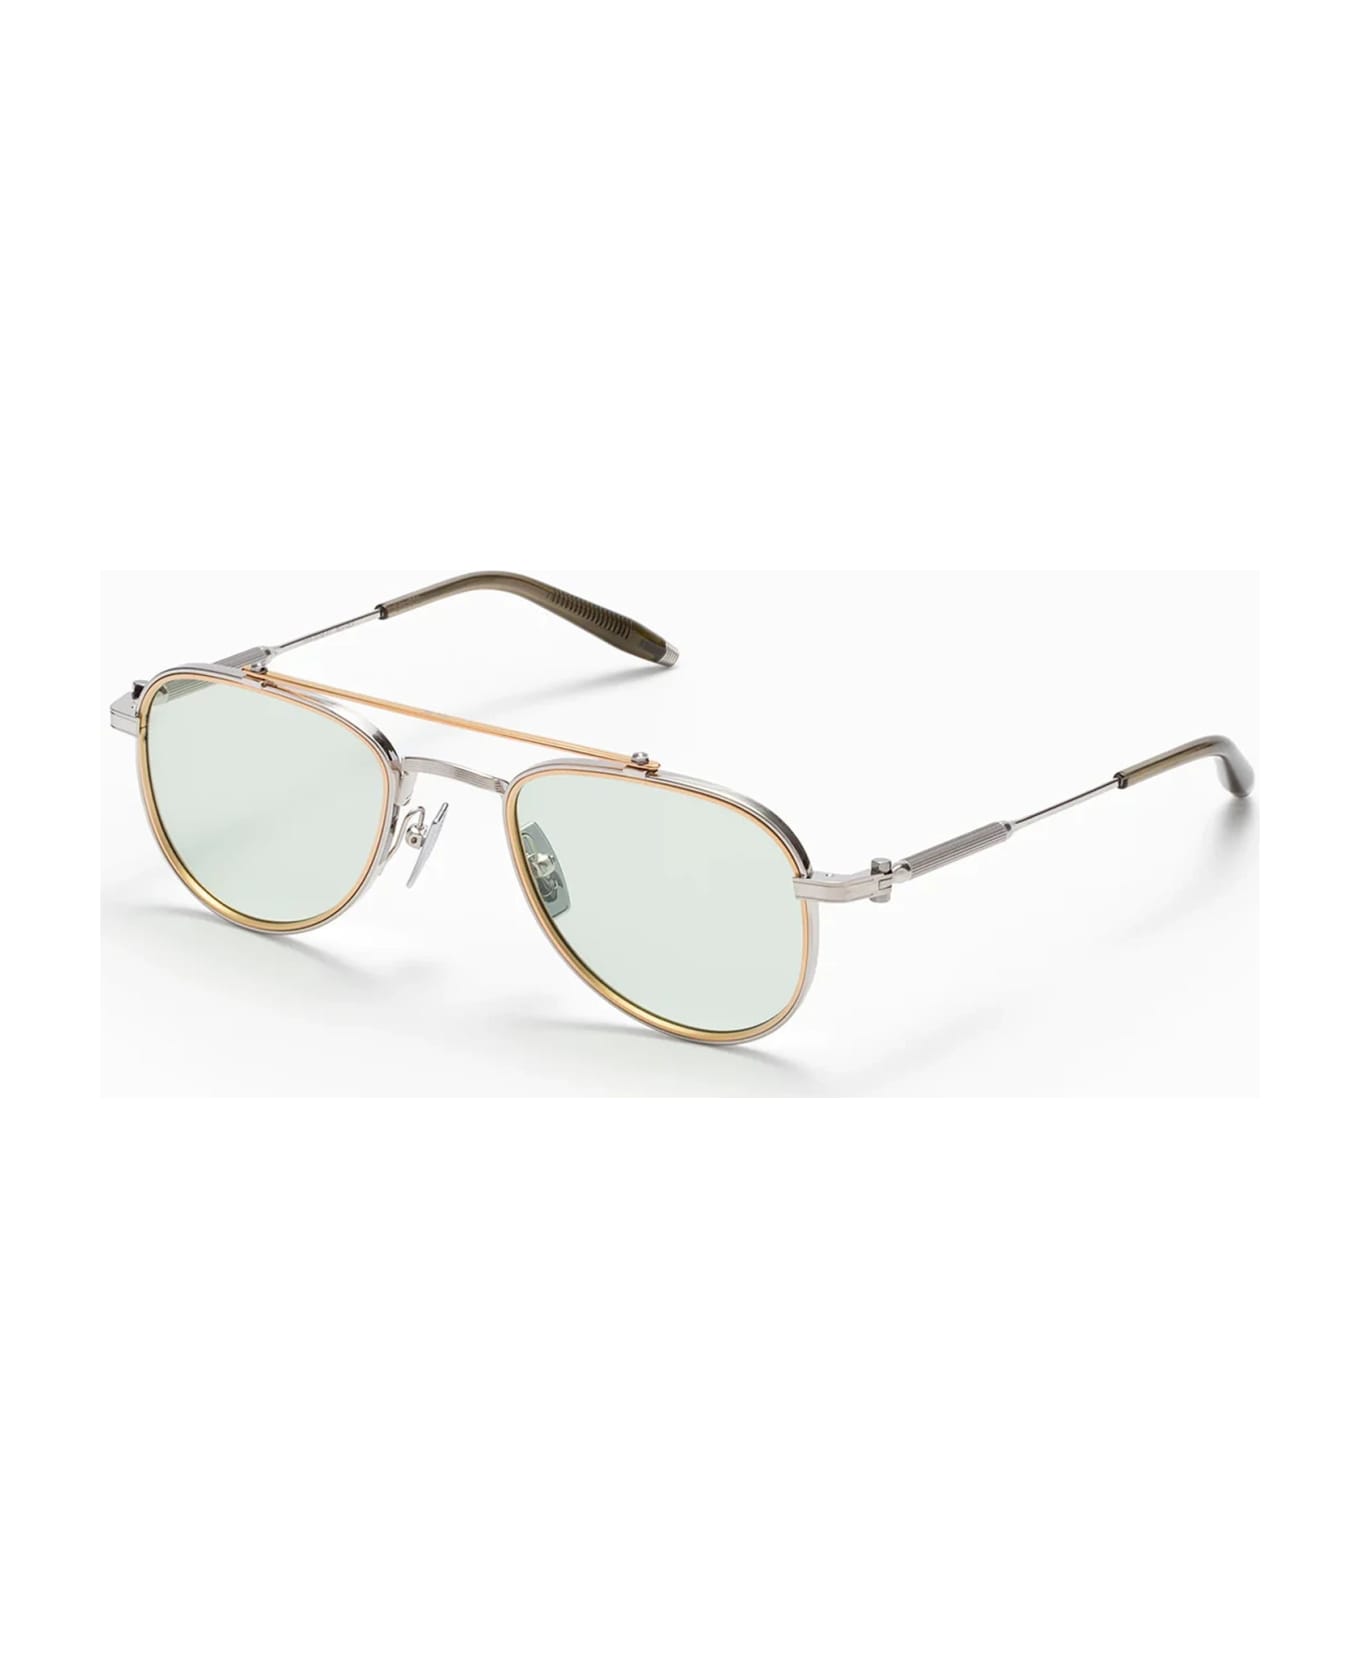 Akoni Calisto - Brushed Silver/matte Gold Brow Bar/olive Glasses - silver/gold